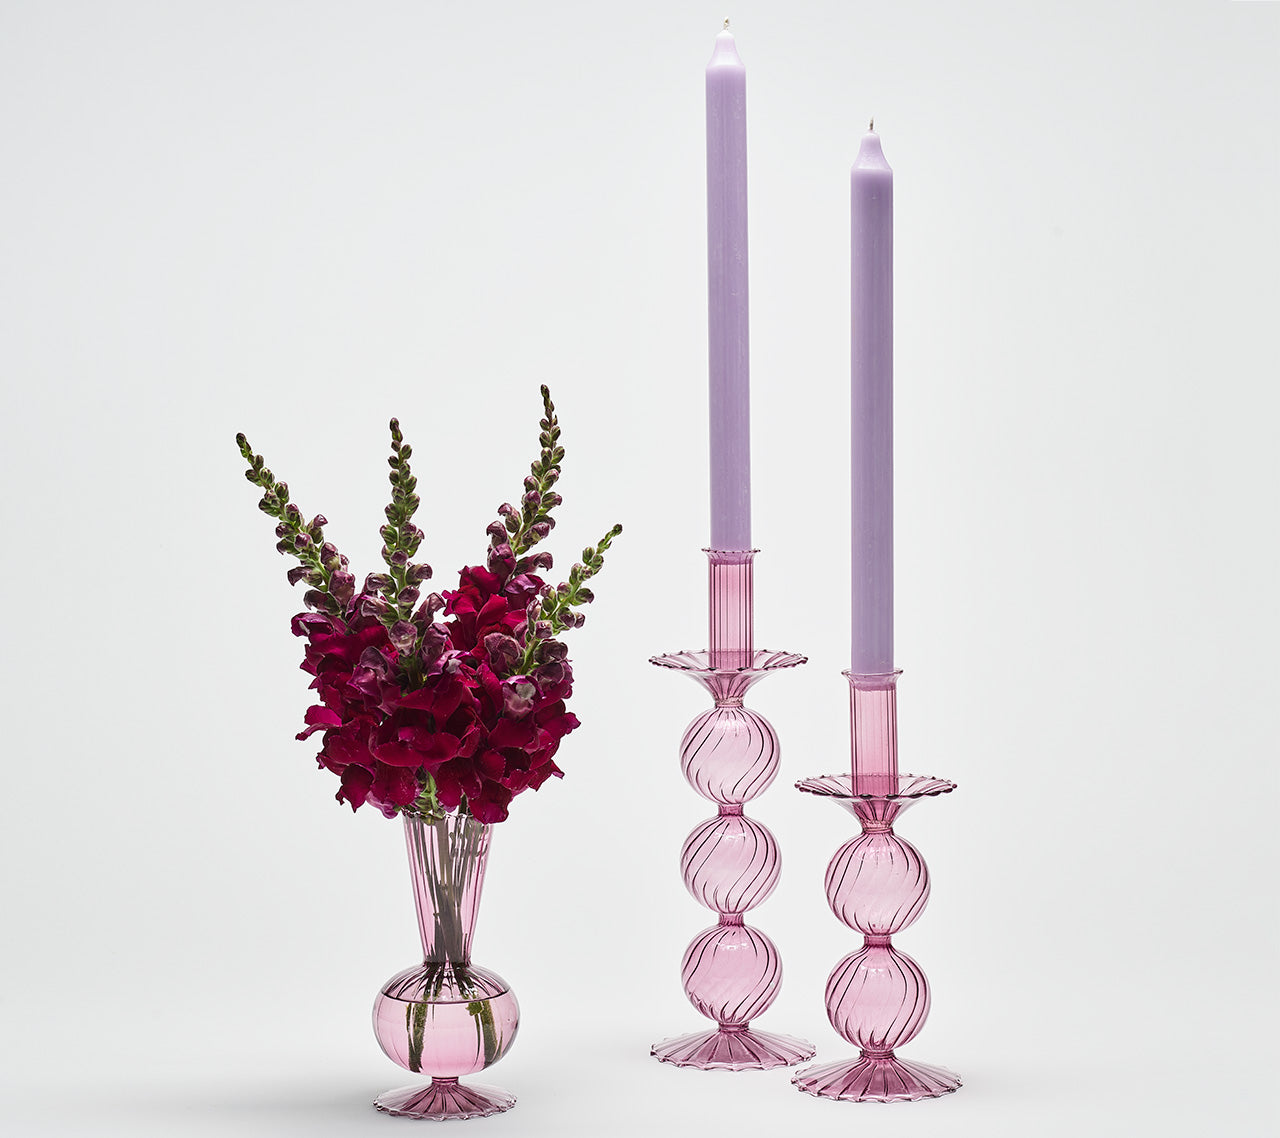 Two Iris Tall Candle Holders in lavender next to a lavender vase